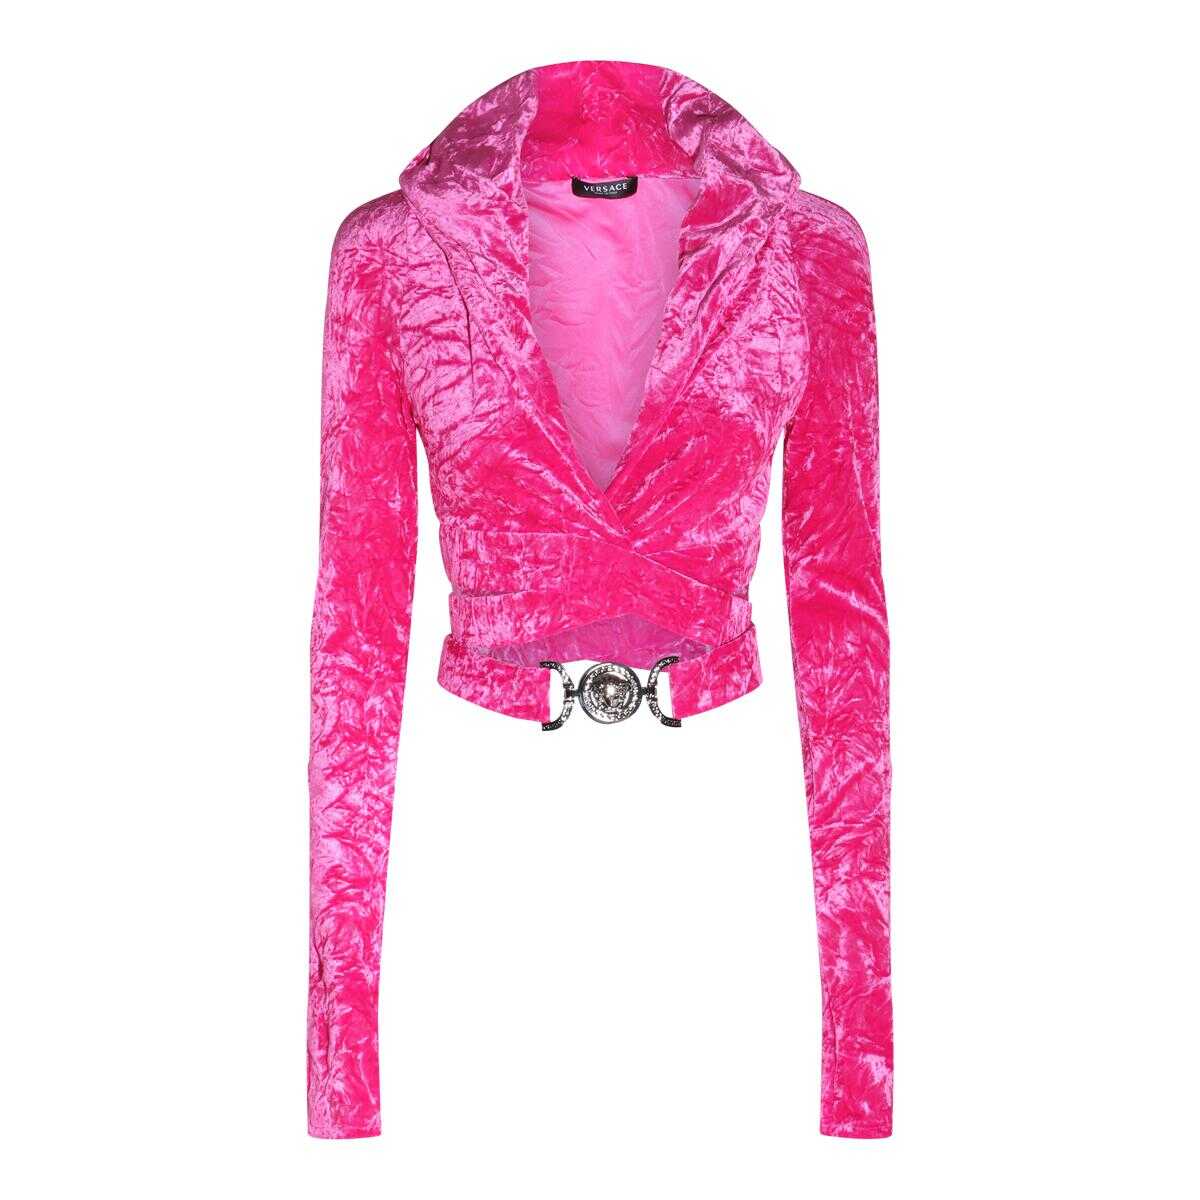 Versace VERSACE GLOSSY PINK CHENILLE STRETCH TOP GLOSSY PINK